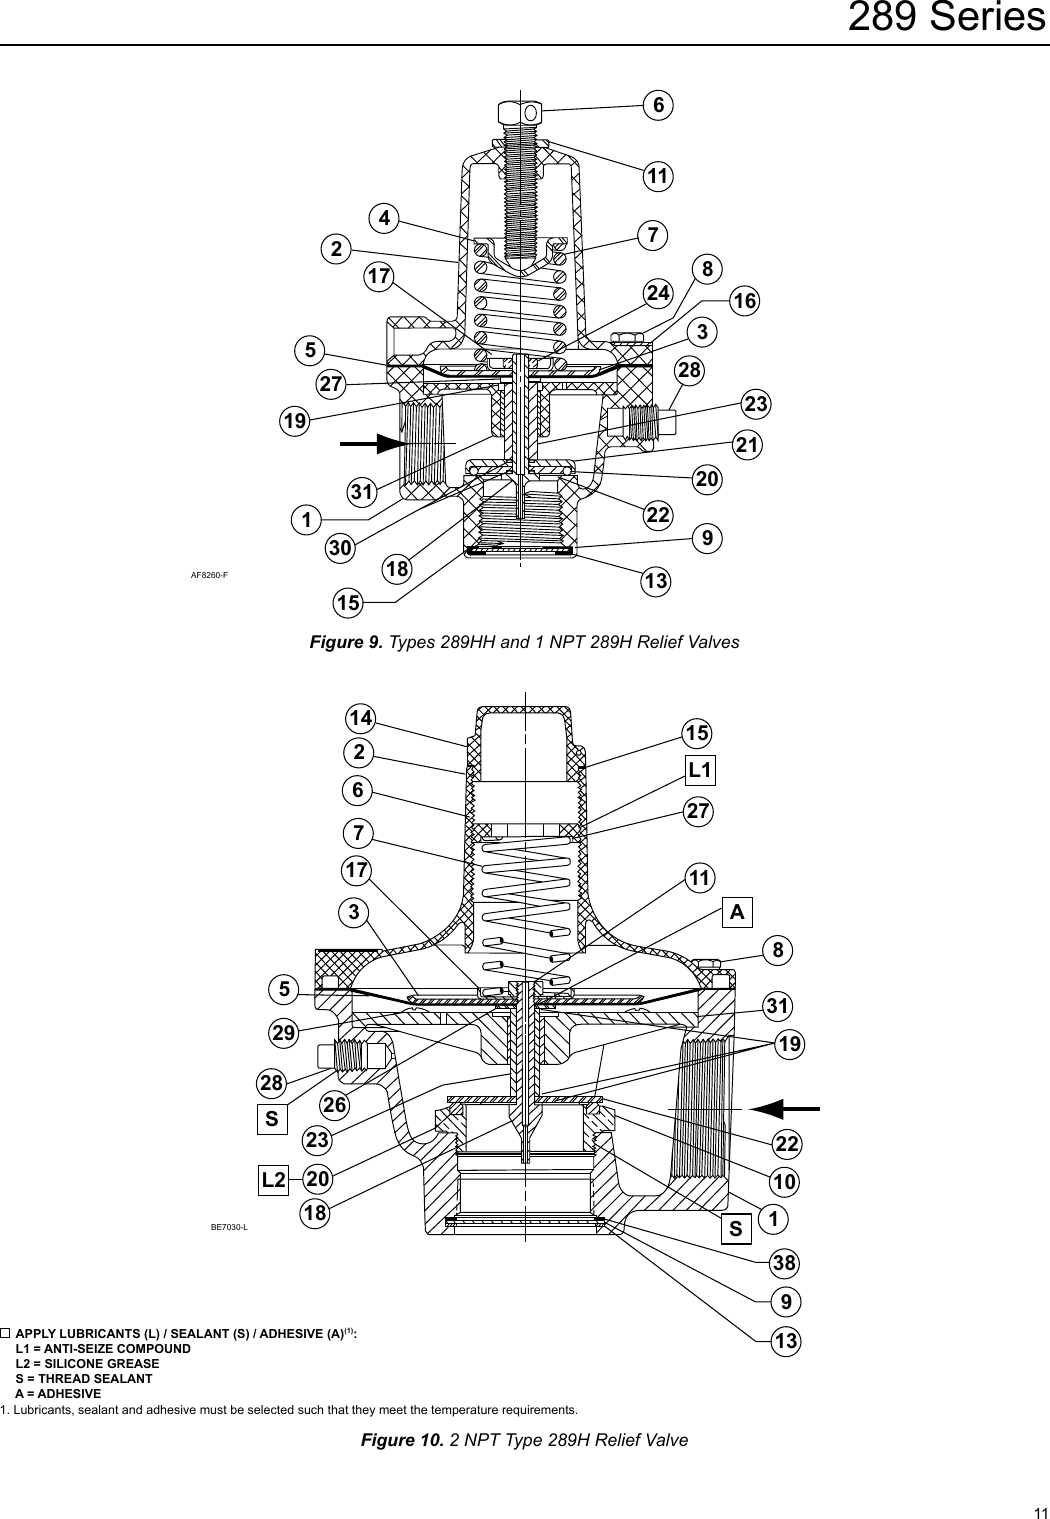 Page 11 of 12 - Emerson Emerson-289-Series-Relief-Valves-Backpressure-Regulators-Instruction-Manual-  Emerson-289-series-relief-valves-backpressure-regulators-instruction-manual